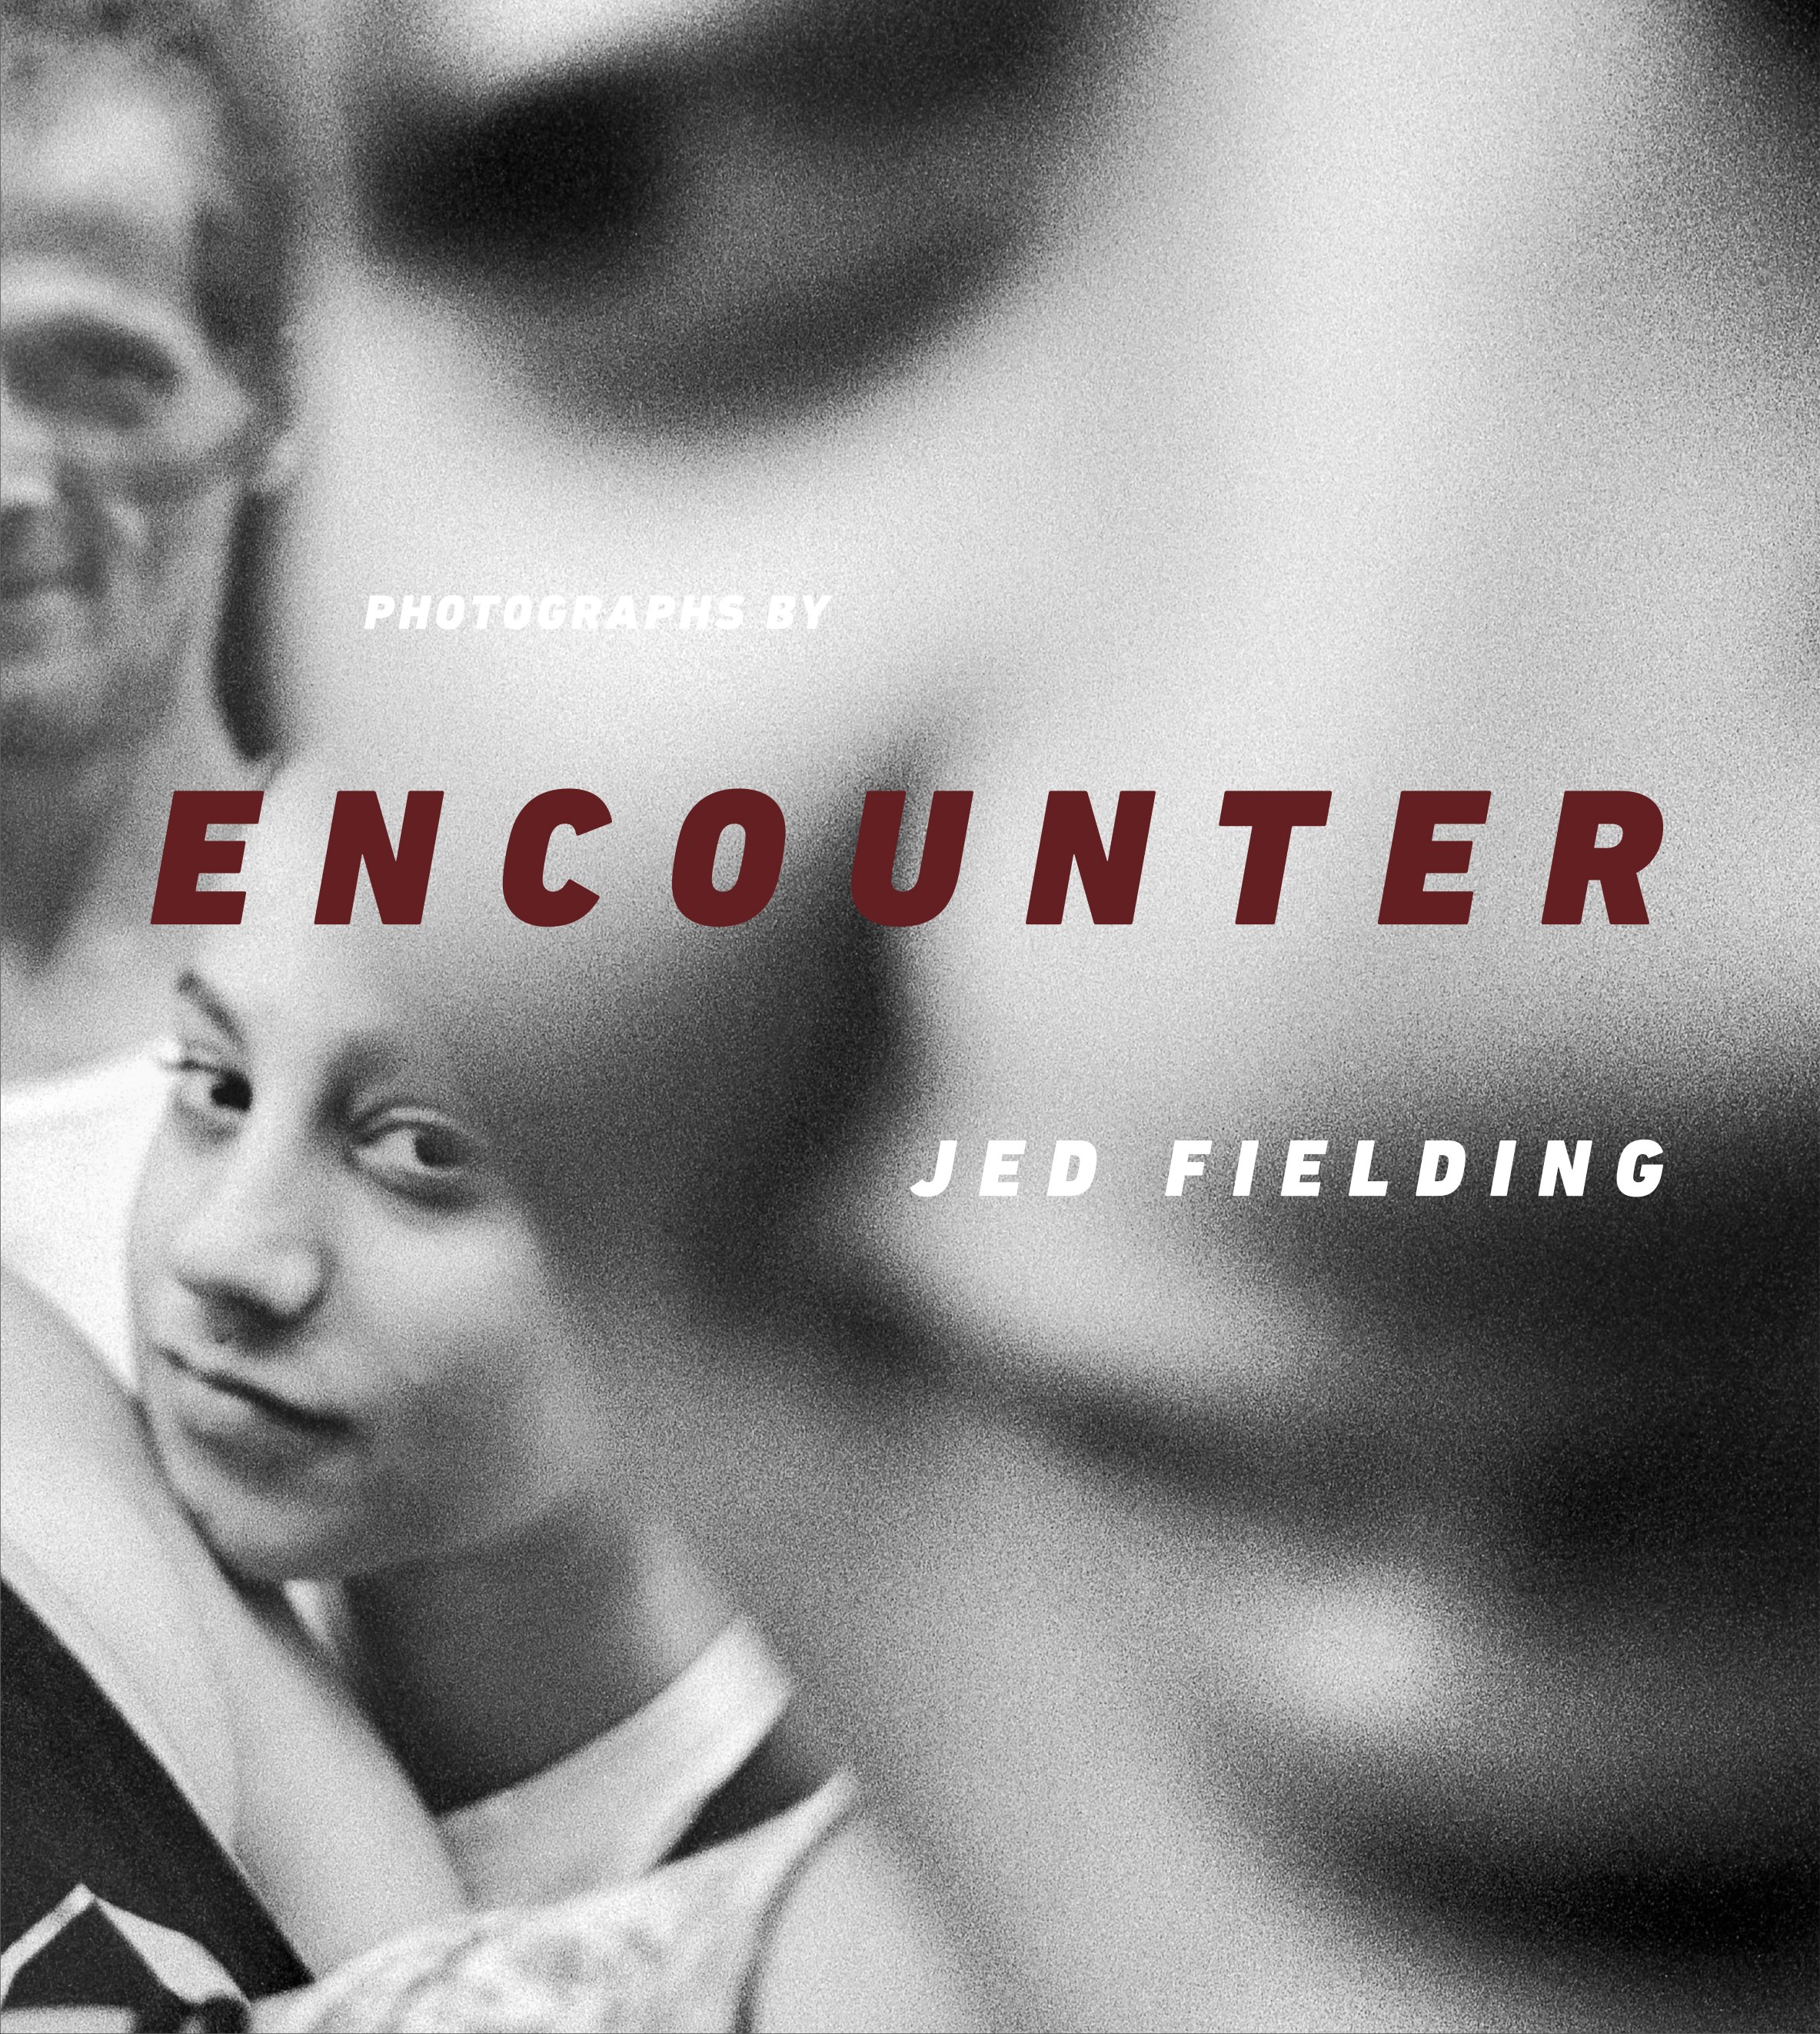 Encounter: Photographs by Jed Fielding